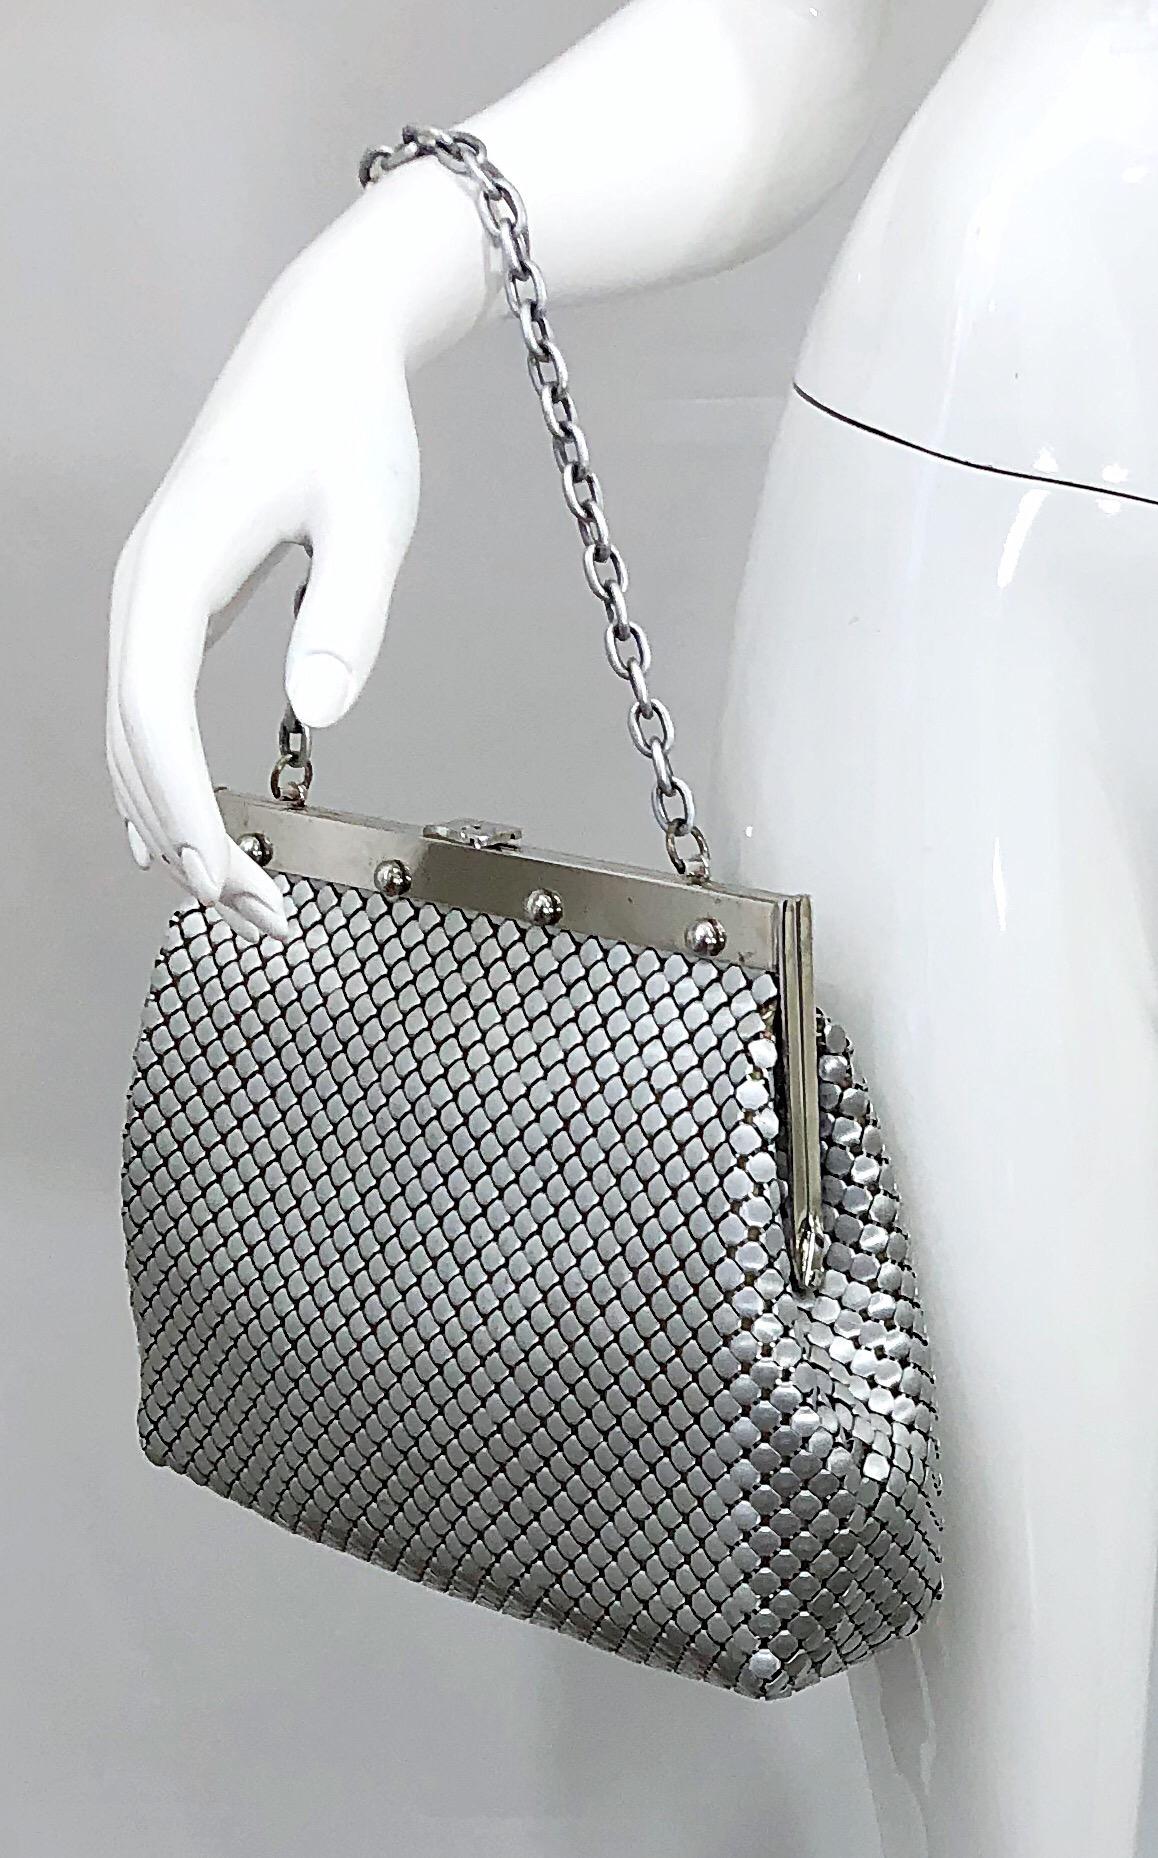 Chic and rare large silver / nickel 1960s WHITING AND DAVIS chain mail metal bag! Features clasp closure and chain strap. Light rayon interior makes it easy to find items. One single pocket. Can be worn either as a handbag or shoulder bag. Fits all